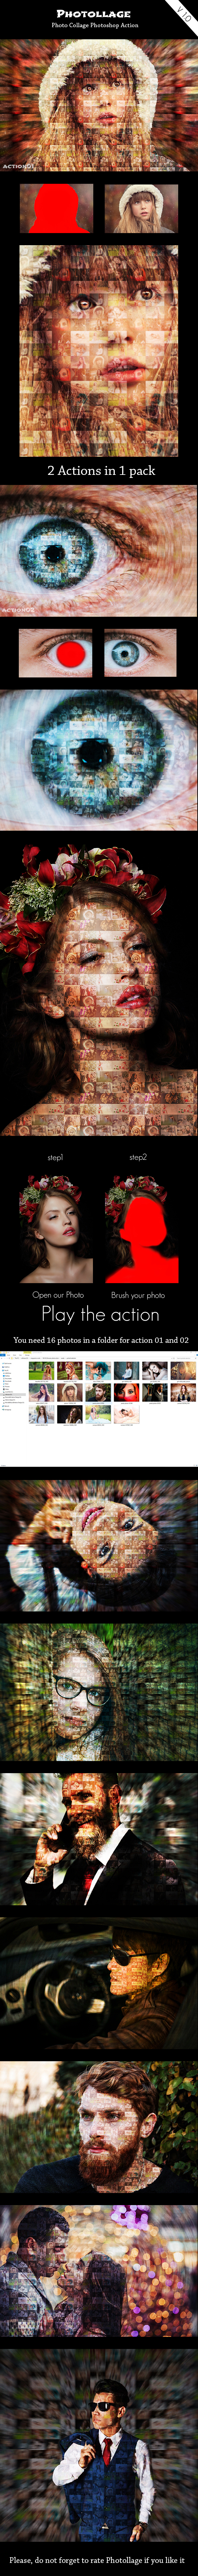 GraphicRiver Photollage Ps Action Pack Ver 1.0 21194060